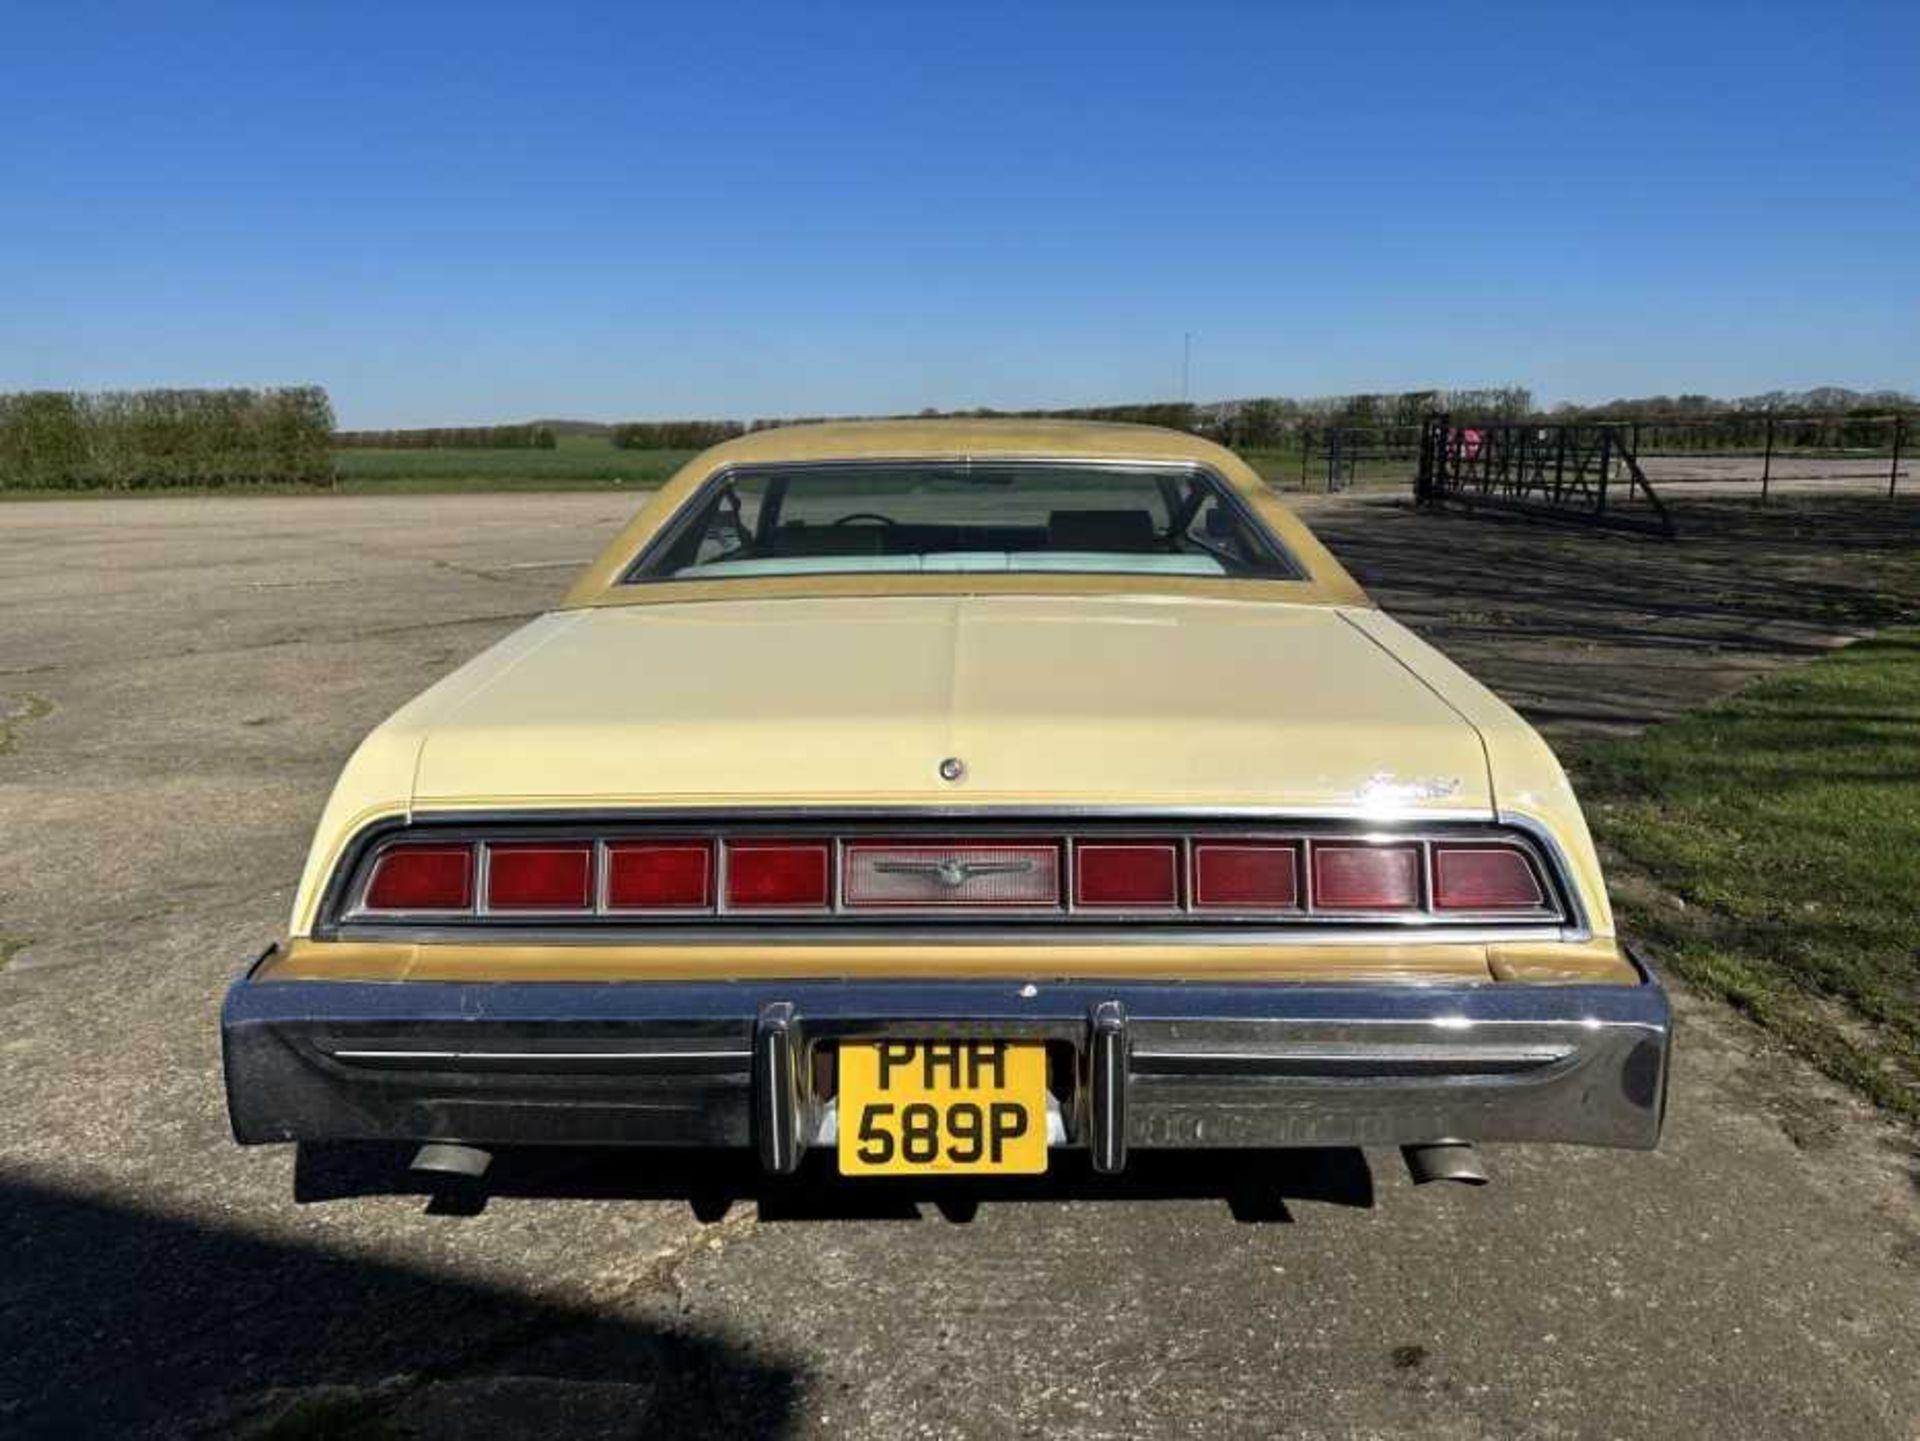 1976 Ford Thunderbird Coupe, Registration PHH 589P. This outrageous classic American grand tourer ha - Image 9 of 35